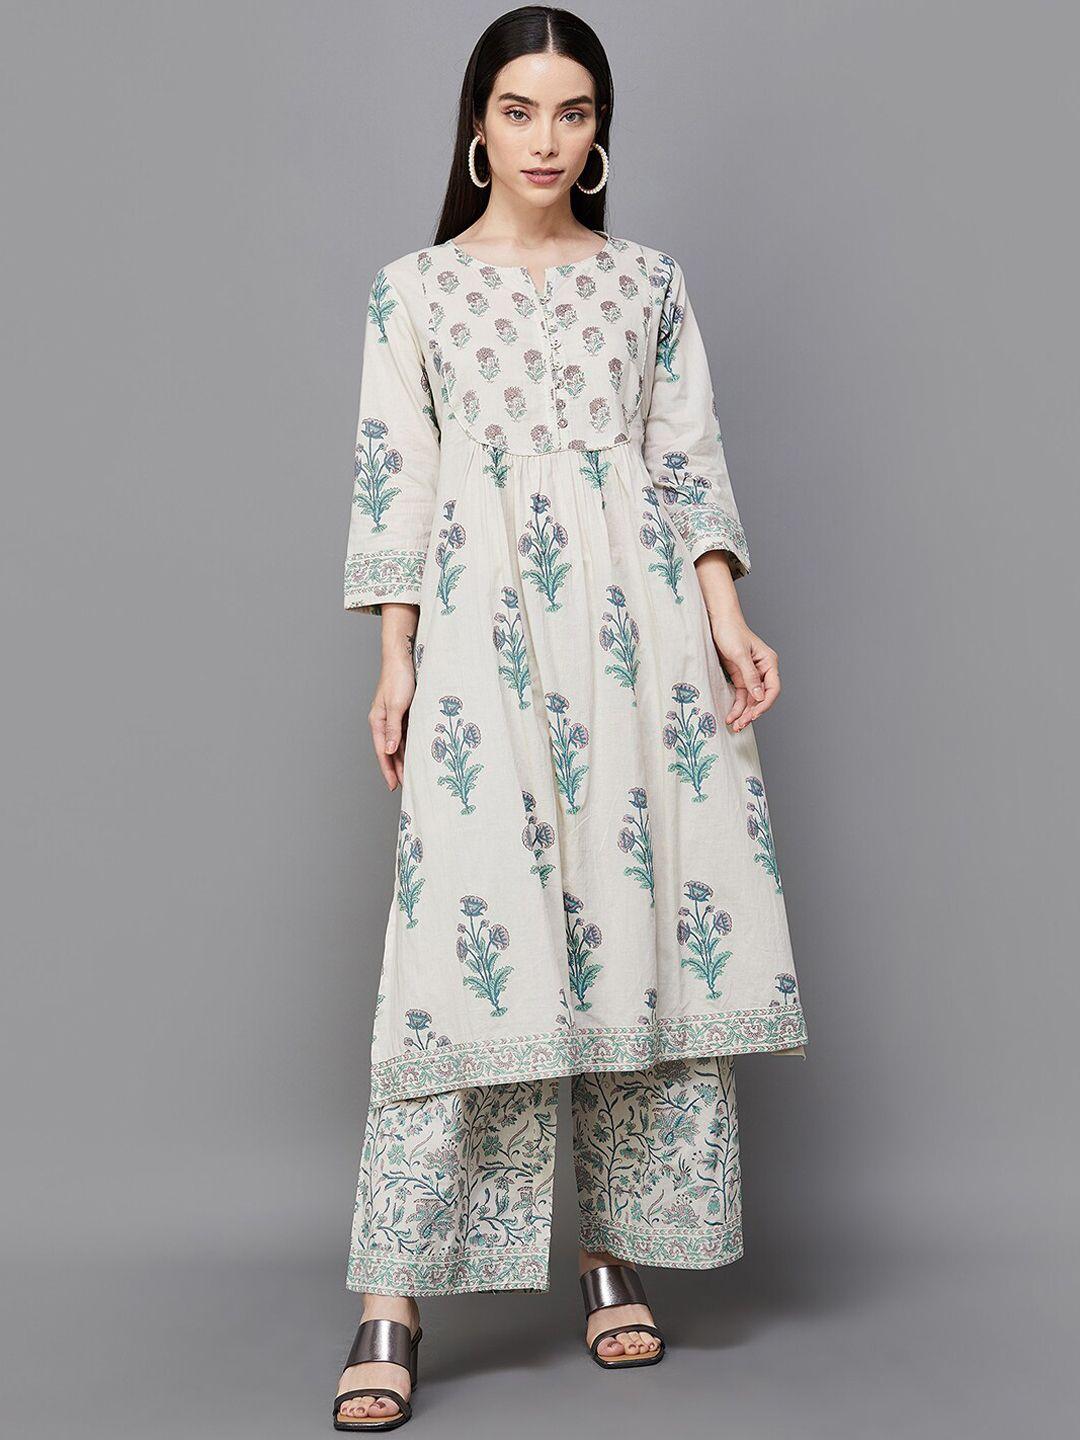 melange-by-lifestyle-floral-printed-regular-pure-cotton-kurta-with-palazzos